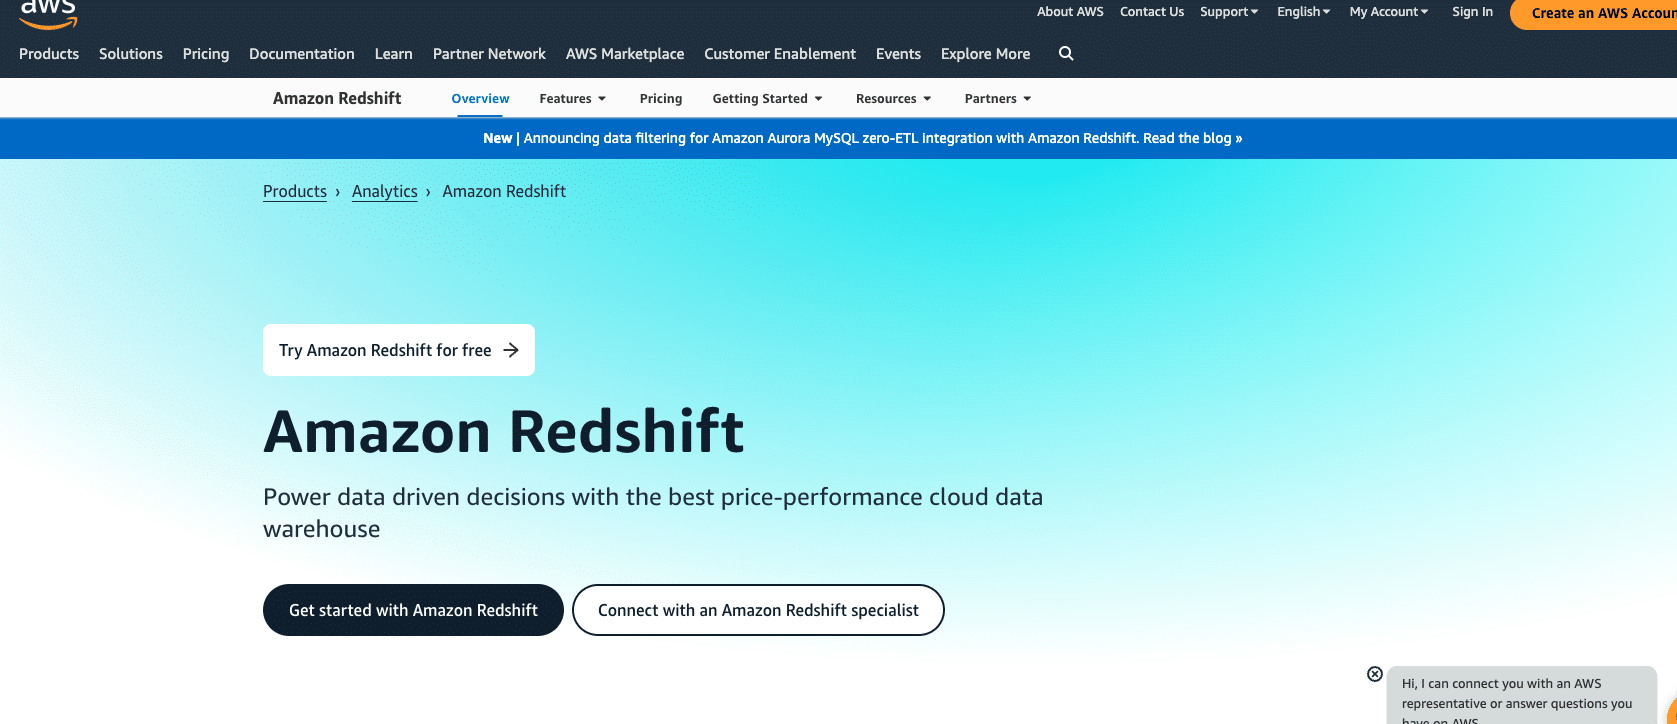  Amazon Redshift: Powerful and cost-effective cloud data warehouse